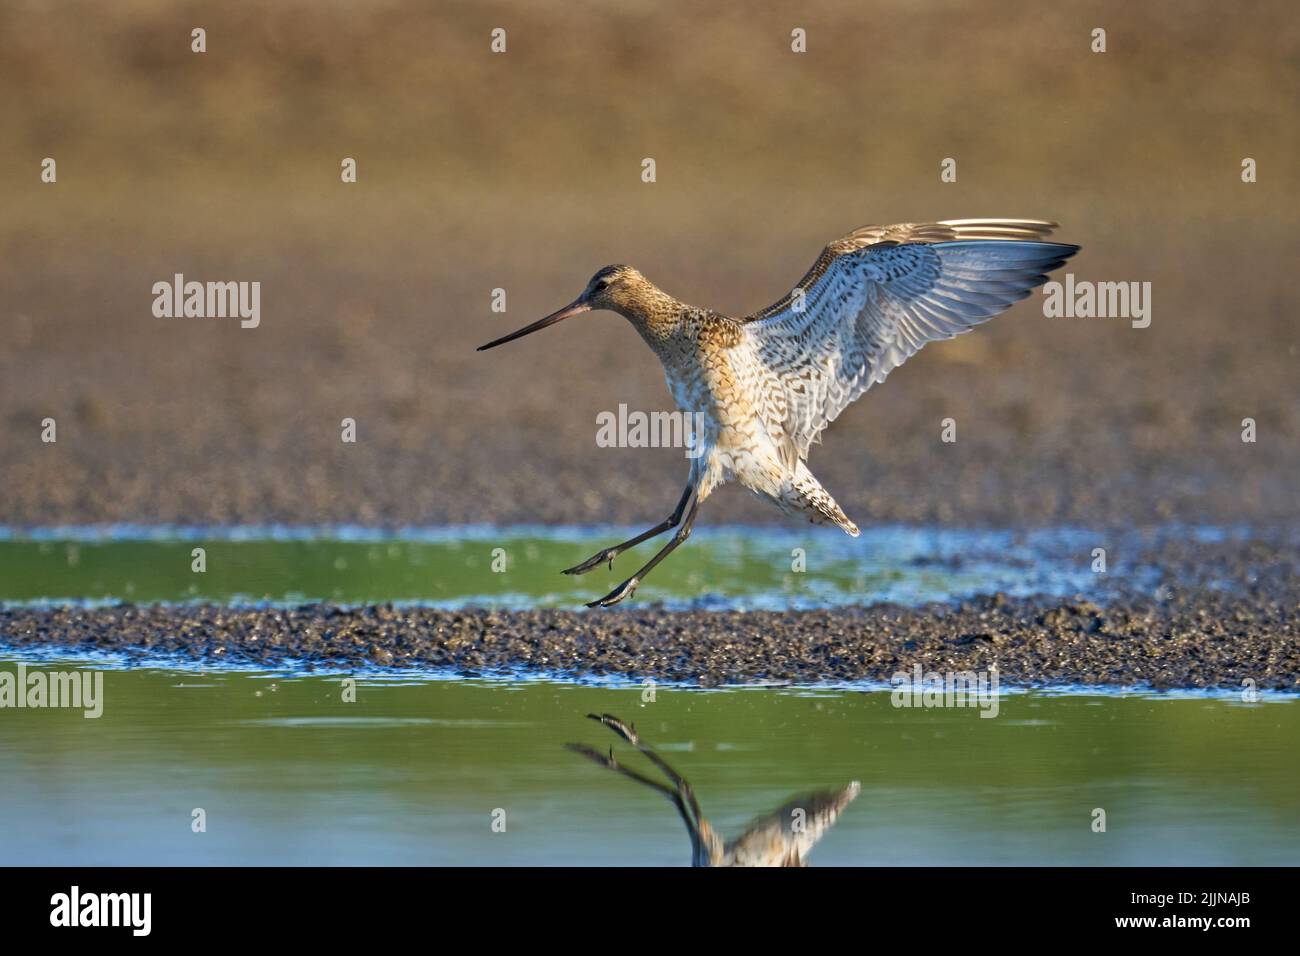 Bar-tailed godwit (Limosa lapponica) in its natural environment Stock Photo